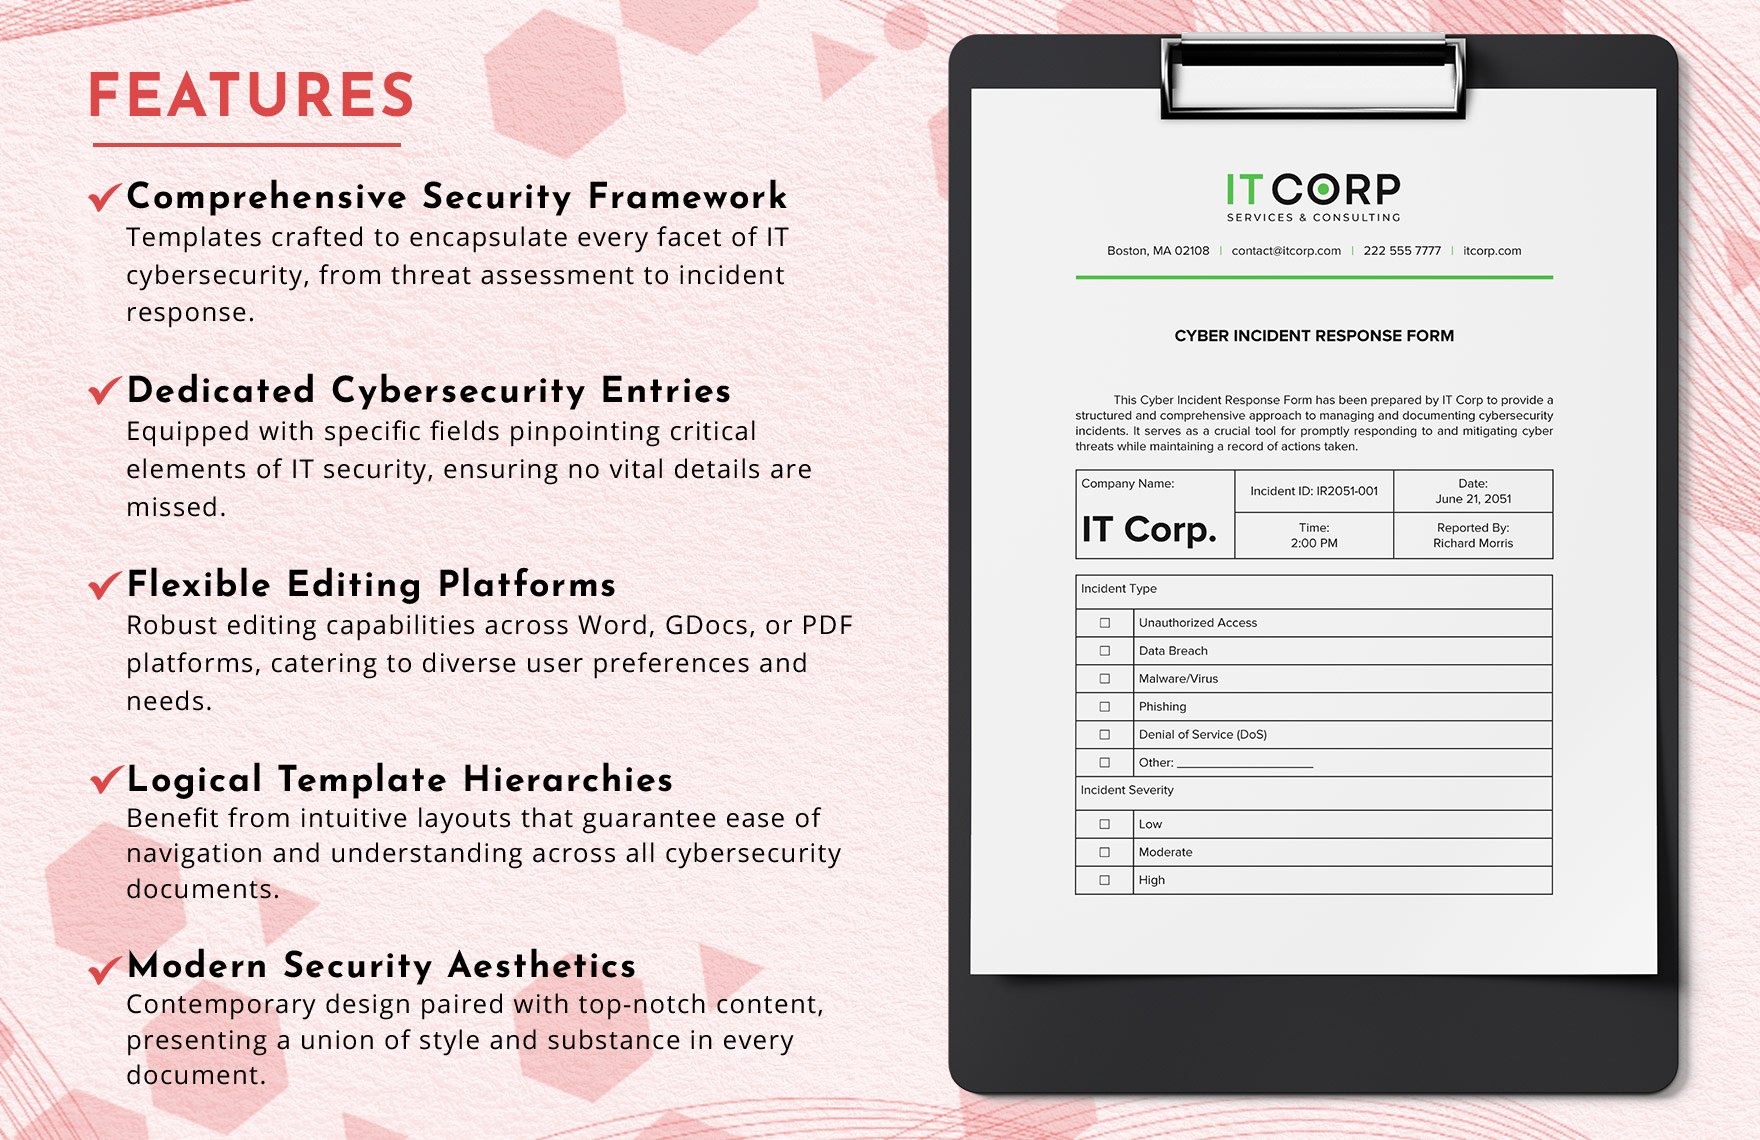 Cyber Incident Response Form Template